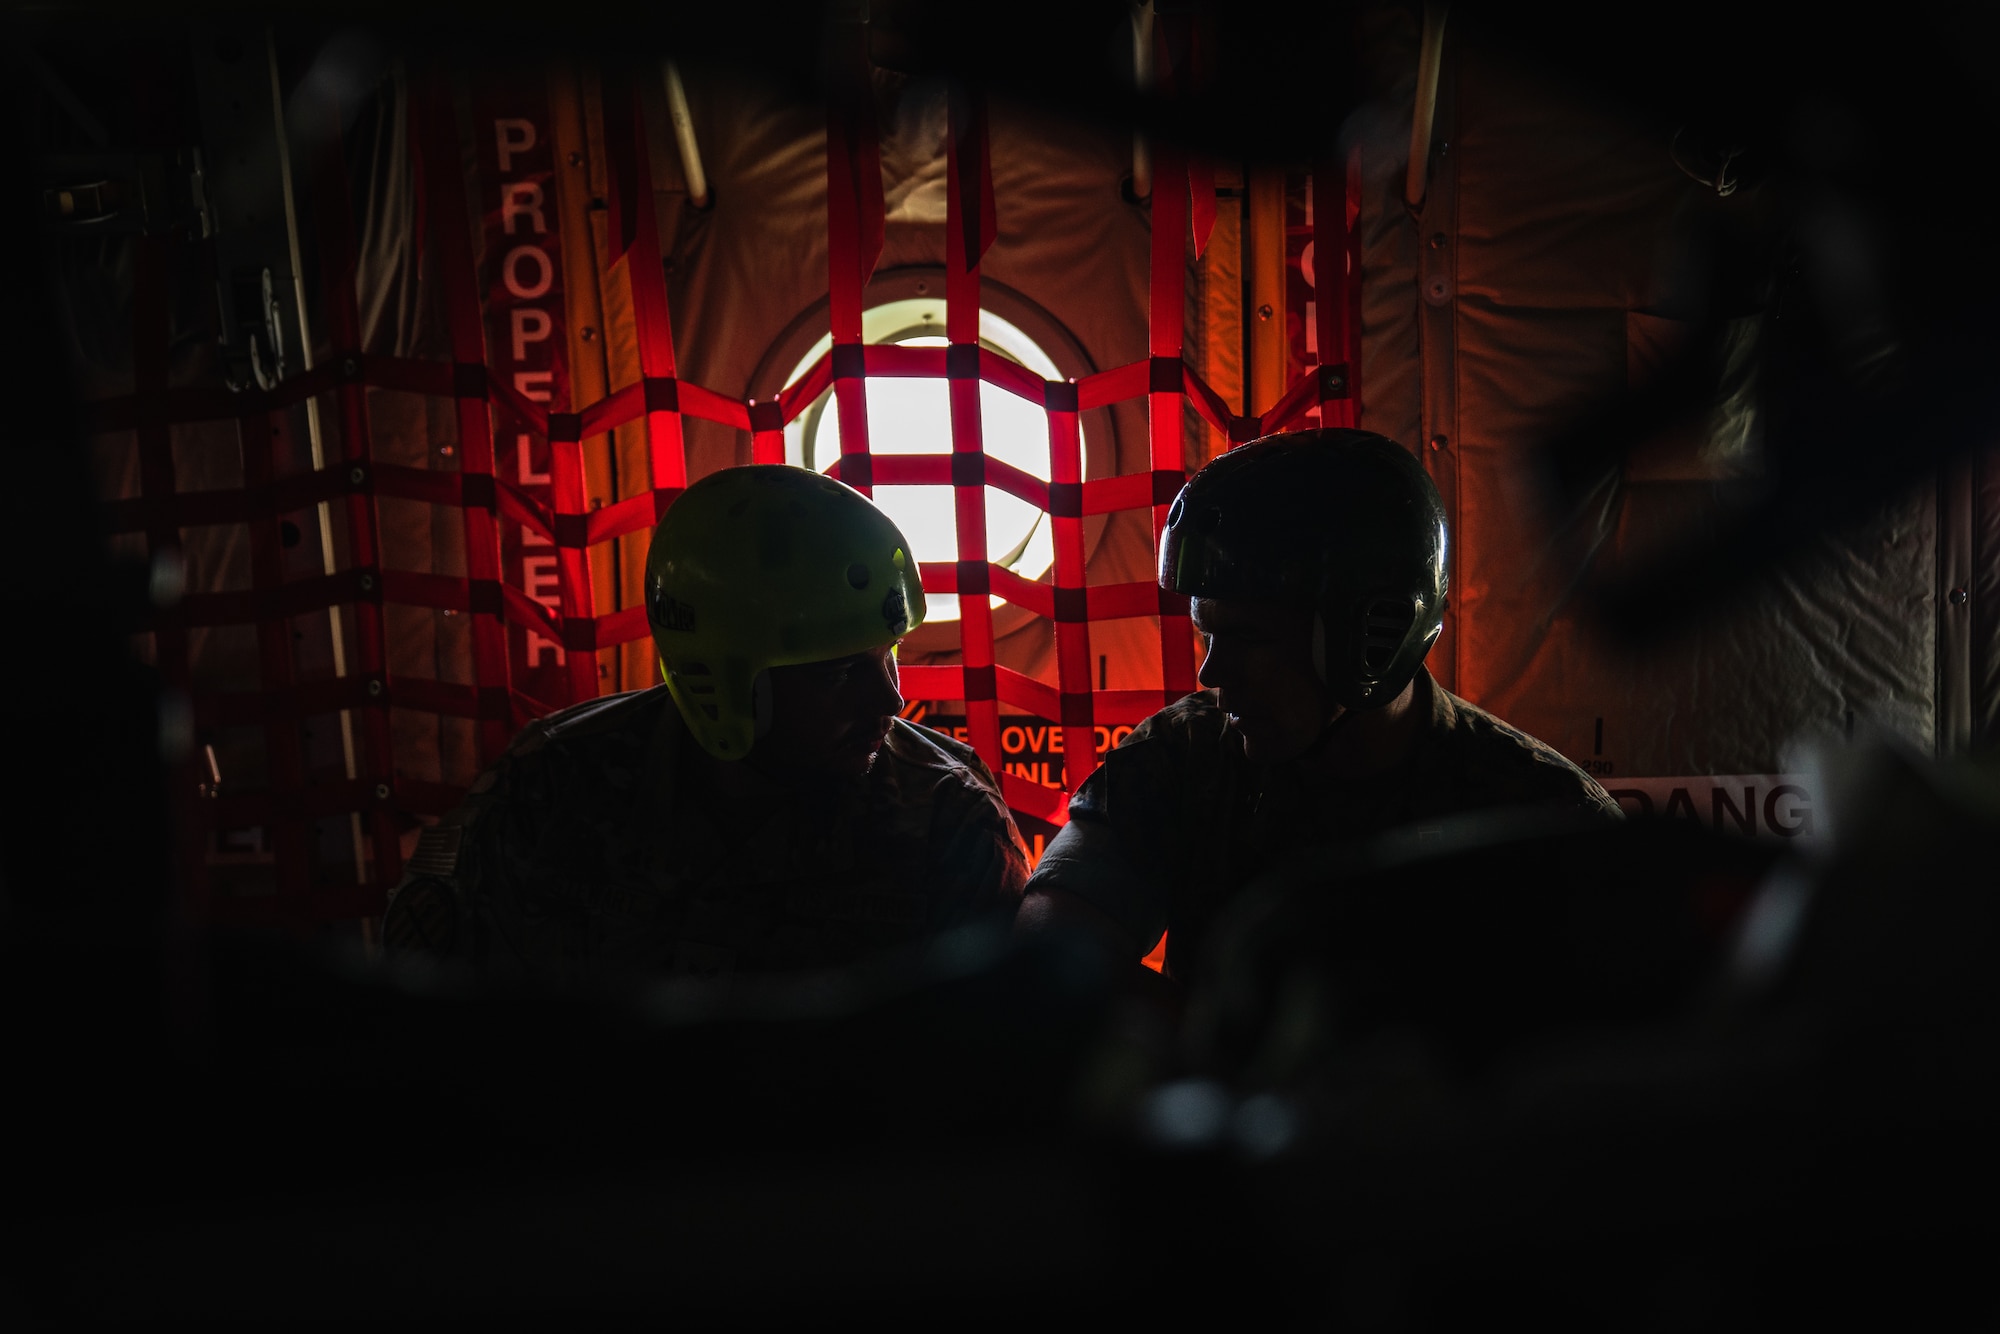 U.S. Marine Corps Capt. Jason Stewart, U.S. Marine Corps Forces, Central Command G-6 operations officer, right, speaks with his son, Senior Airman Cameron Stewart, Air Force Special Operations Command administrator, on an HC-130J Combat King II aircraft assigned to the 920th Rescue Wing, Patrick Space Force Base, Florida, over Tampa, Florida, Sept. 1, 2022.